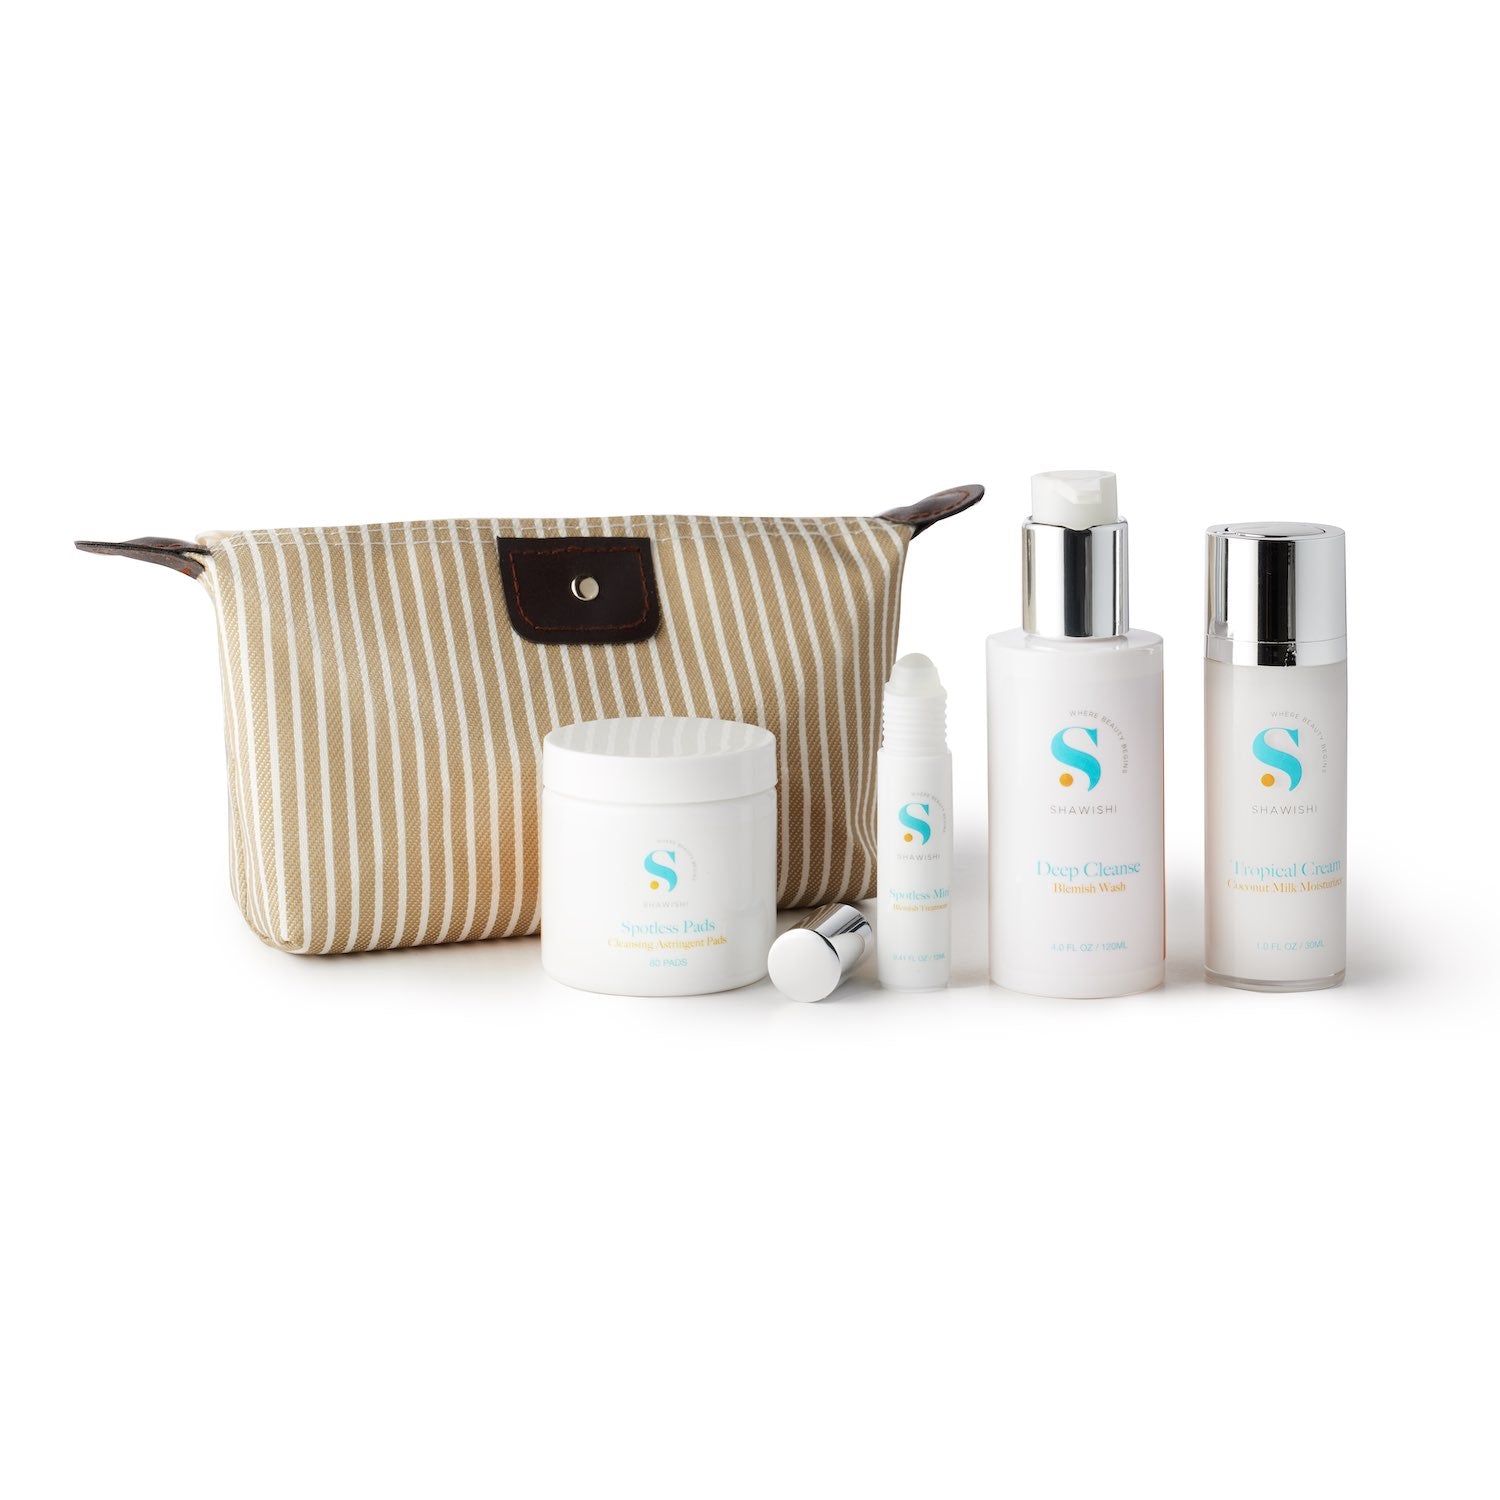 Discovery Ritual Set from the Shawishi Skincare Collection